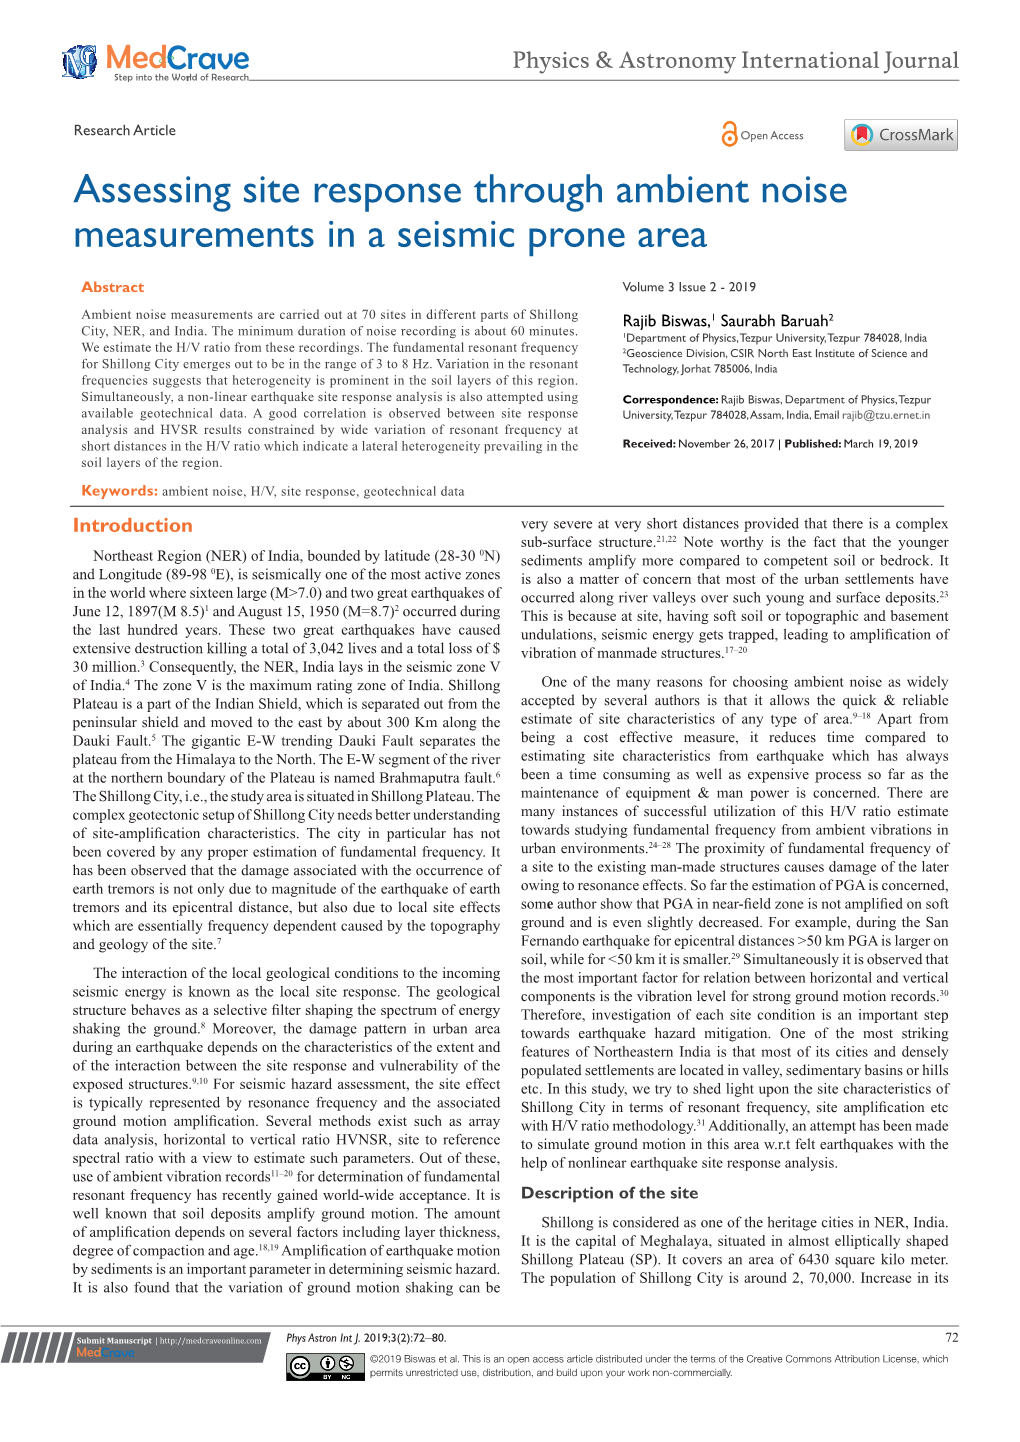 Assessing Site Response Through Ambient Noise Measurements in a Seismic Prone Area